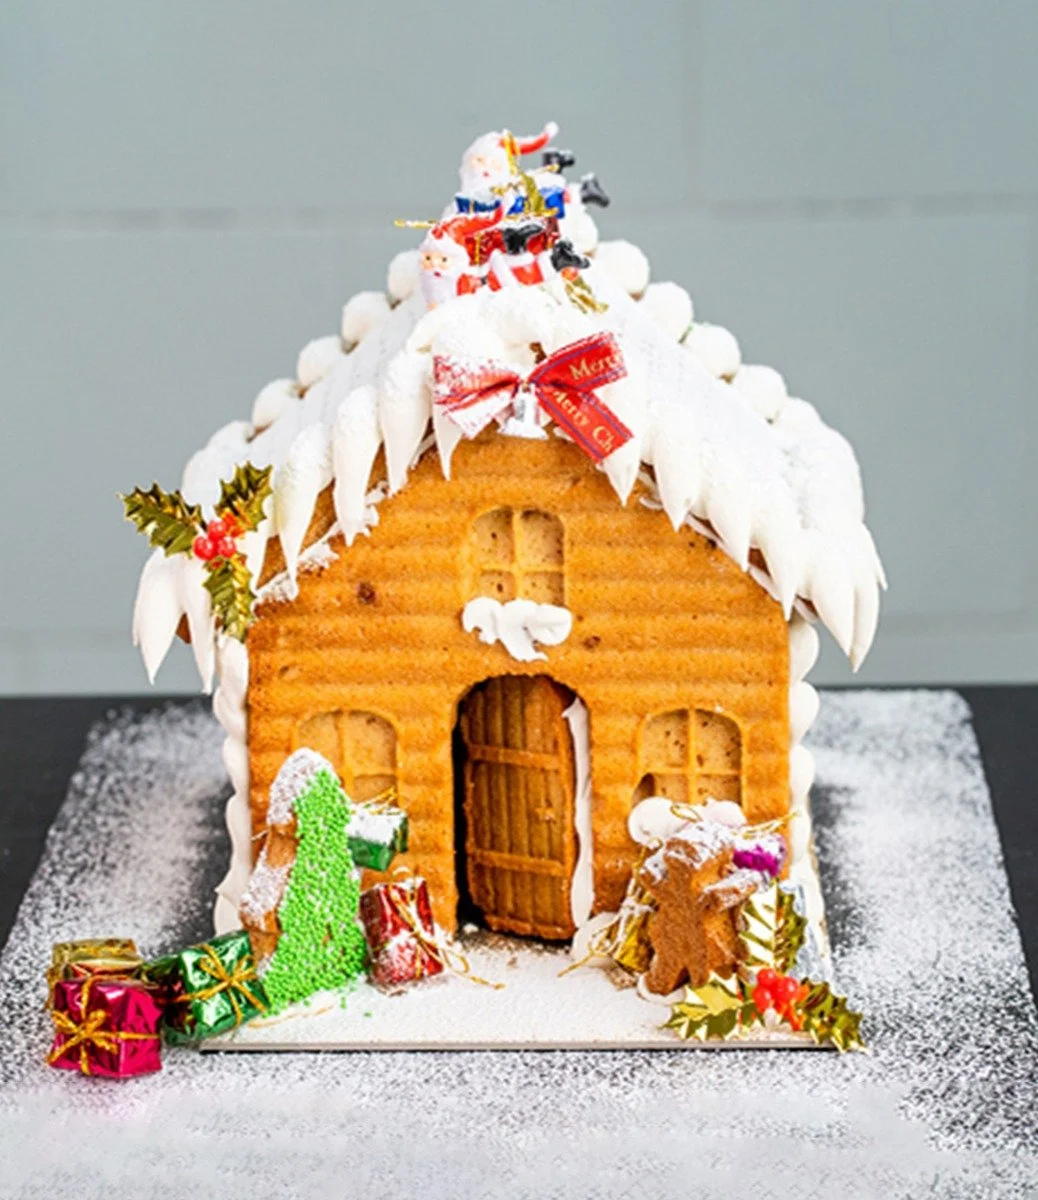 Christmas Ginger Bread House By Bloomsbury's